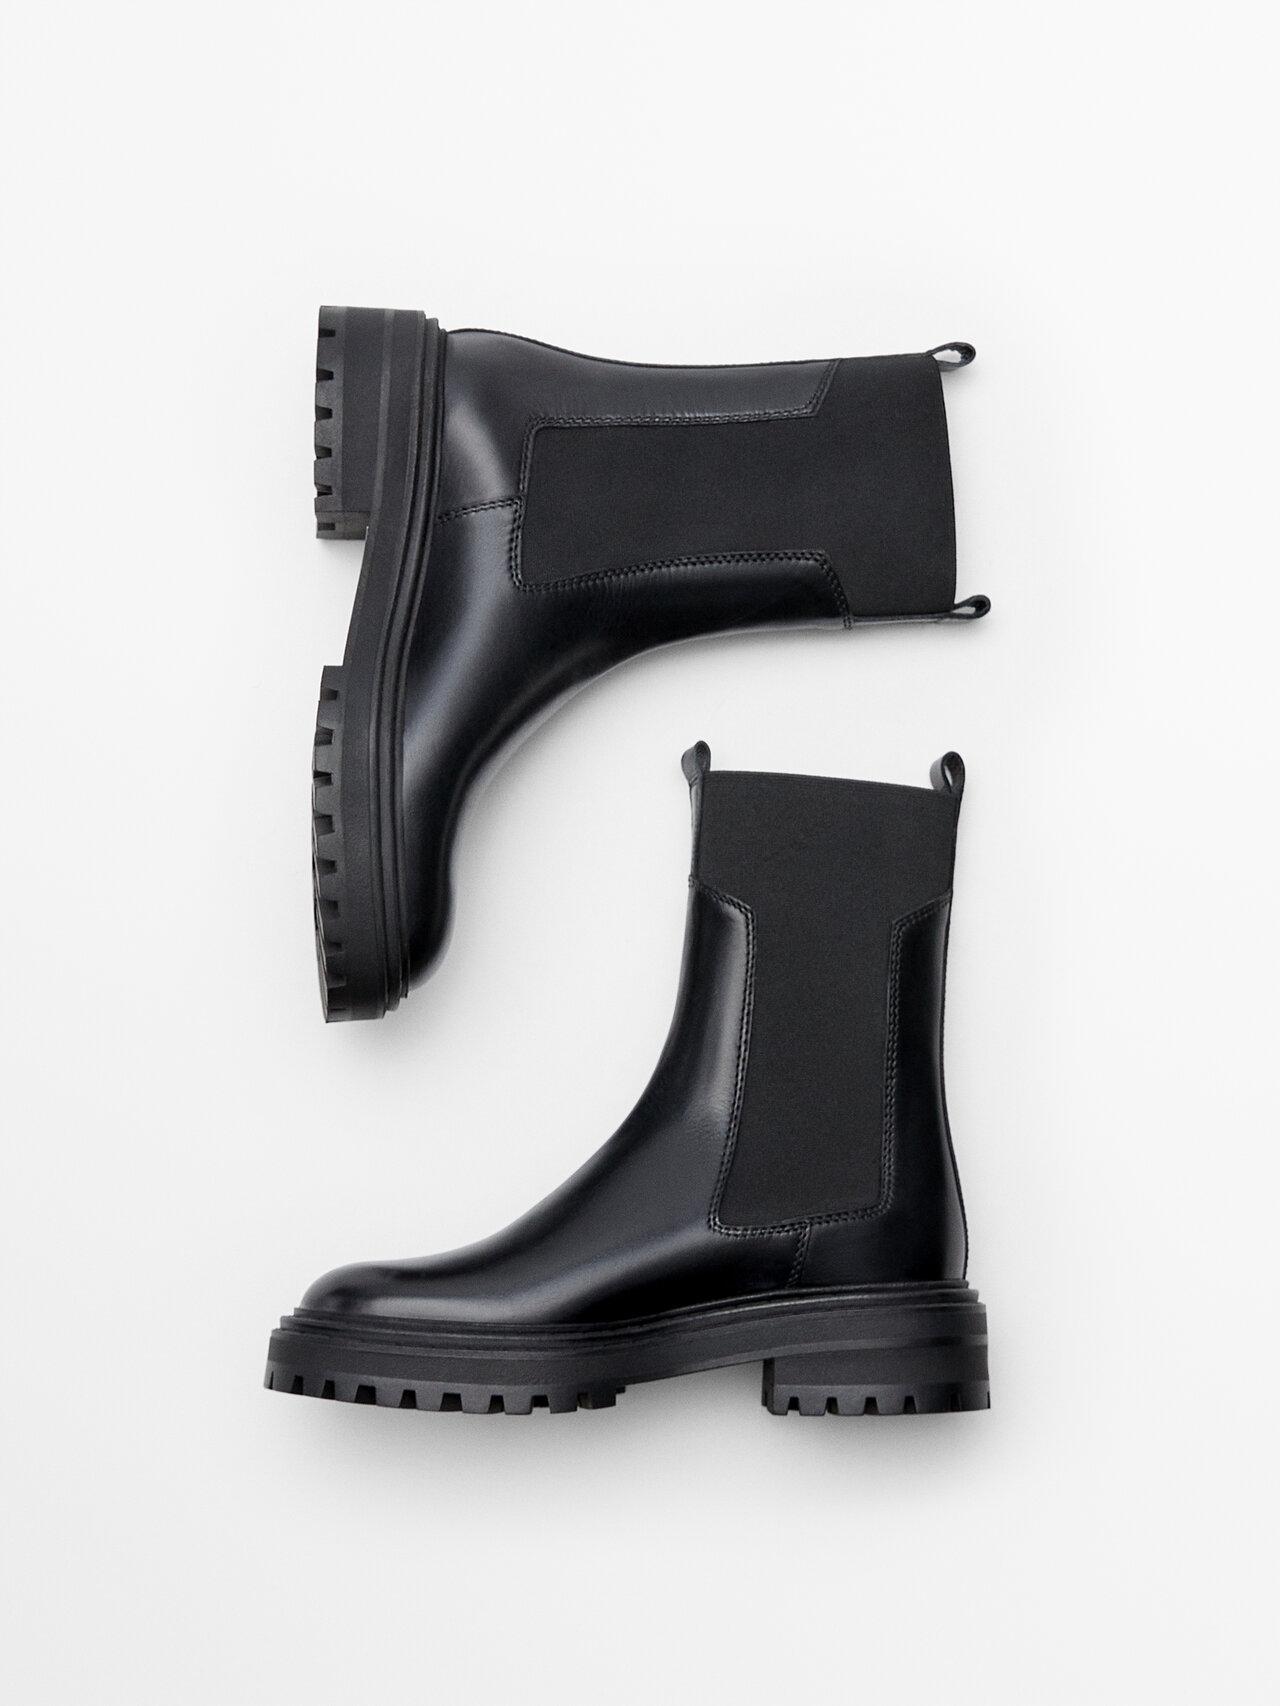 residue Sickness Untouched MASSIMO DUTTI Leather Chelsea Boots With Track Soles in Black | Lyst